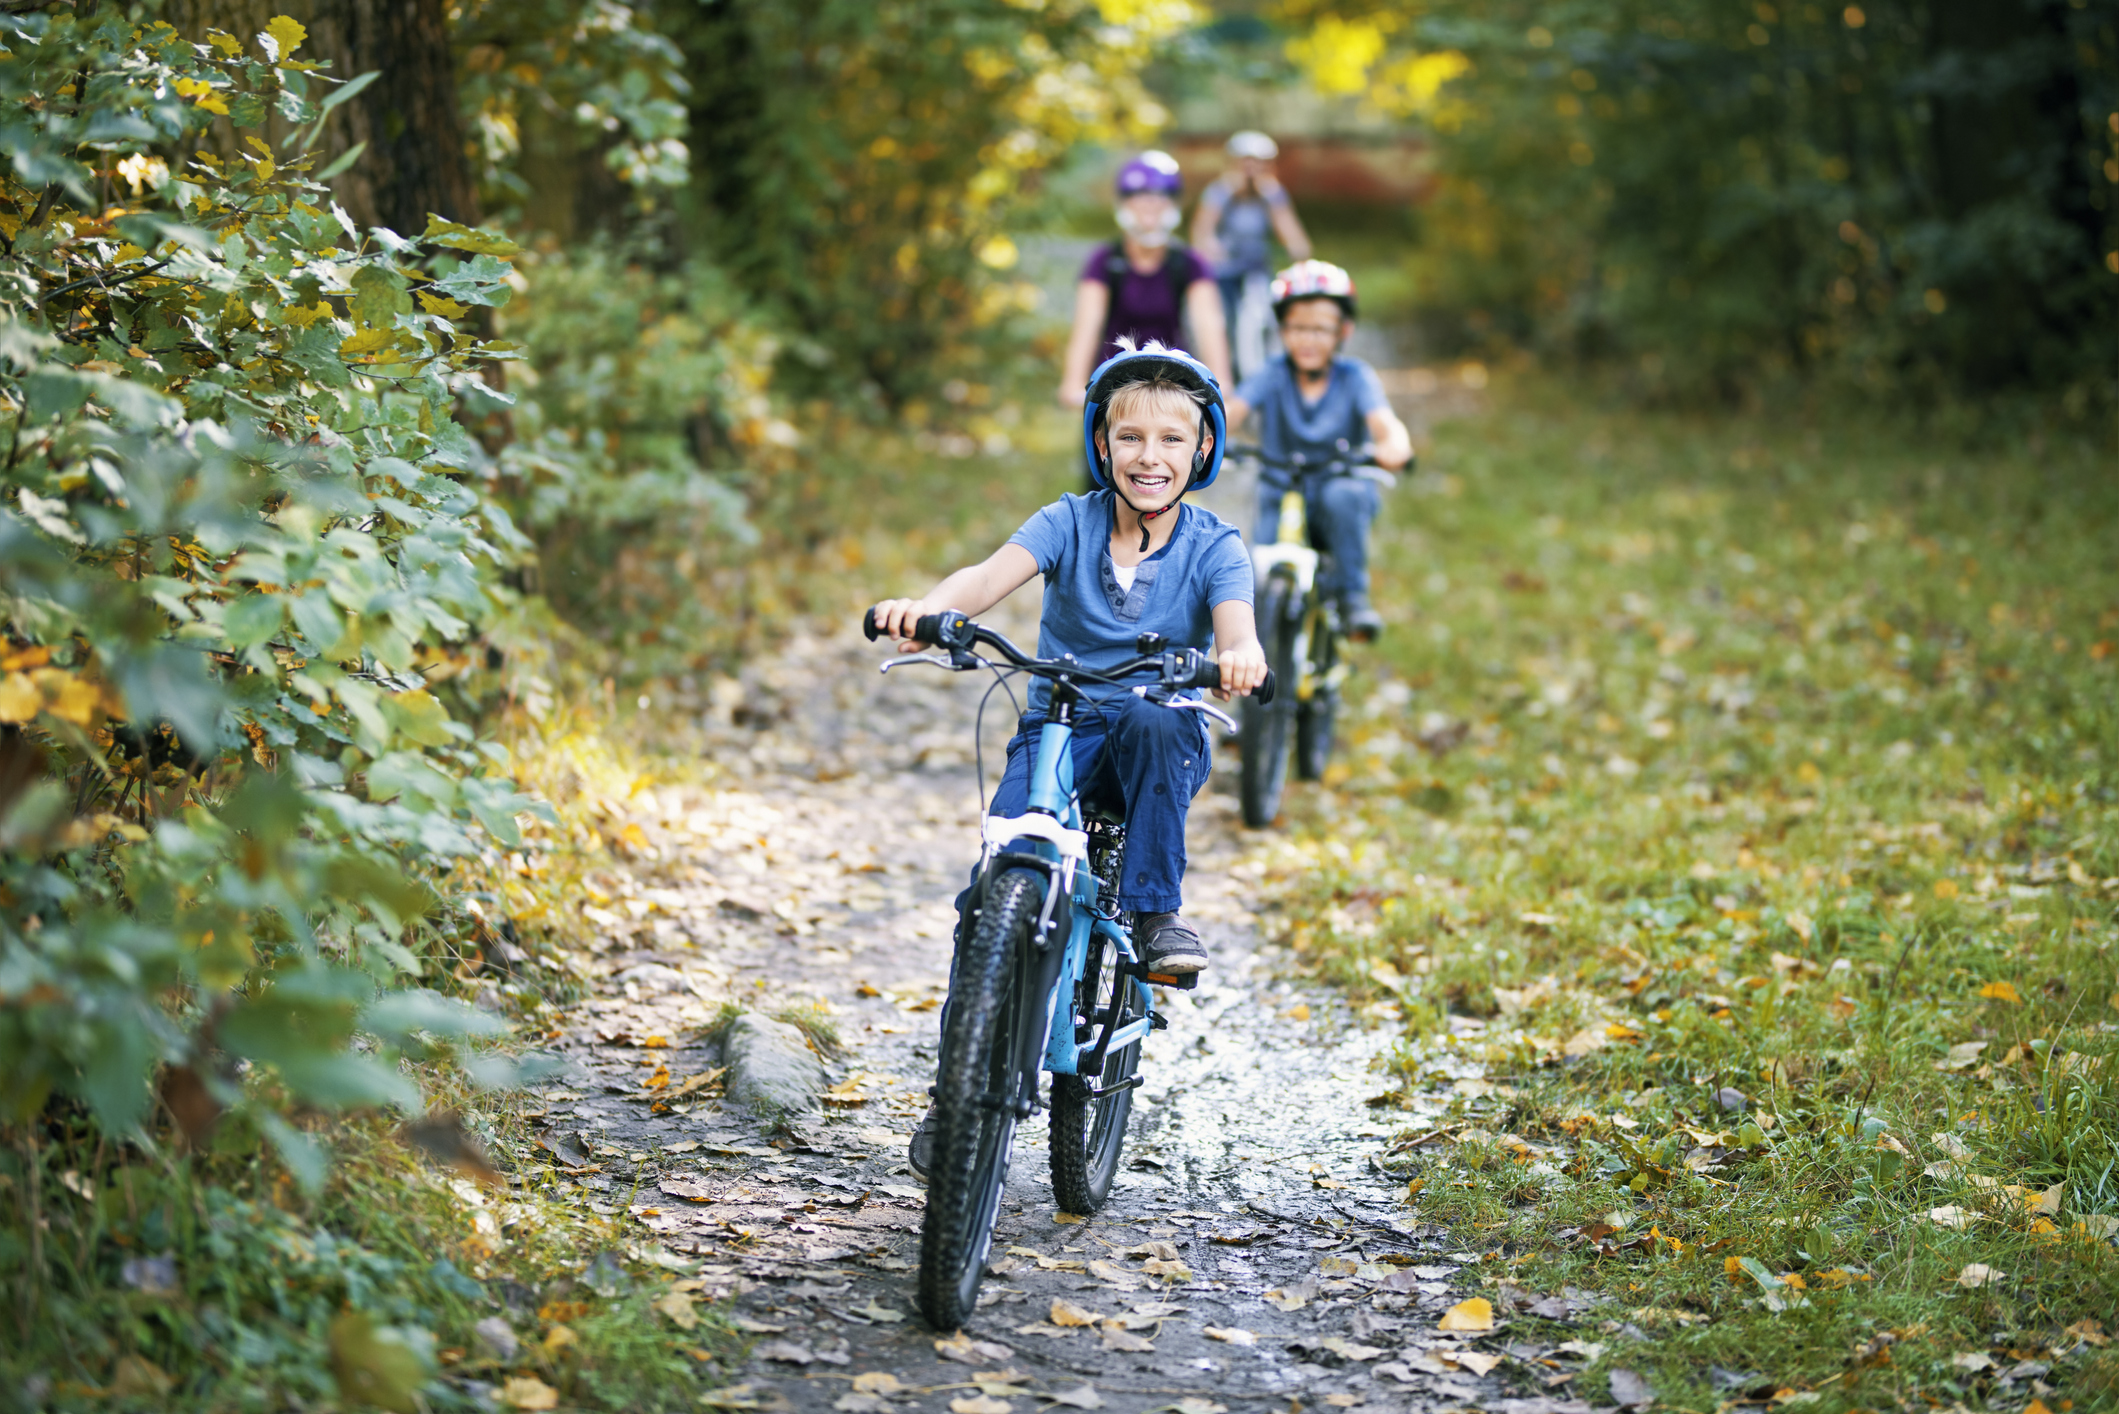 Little boy and his family riding bicycles in nature. The boy is smiling happily.
Nikon D810